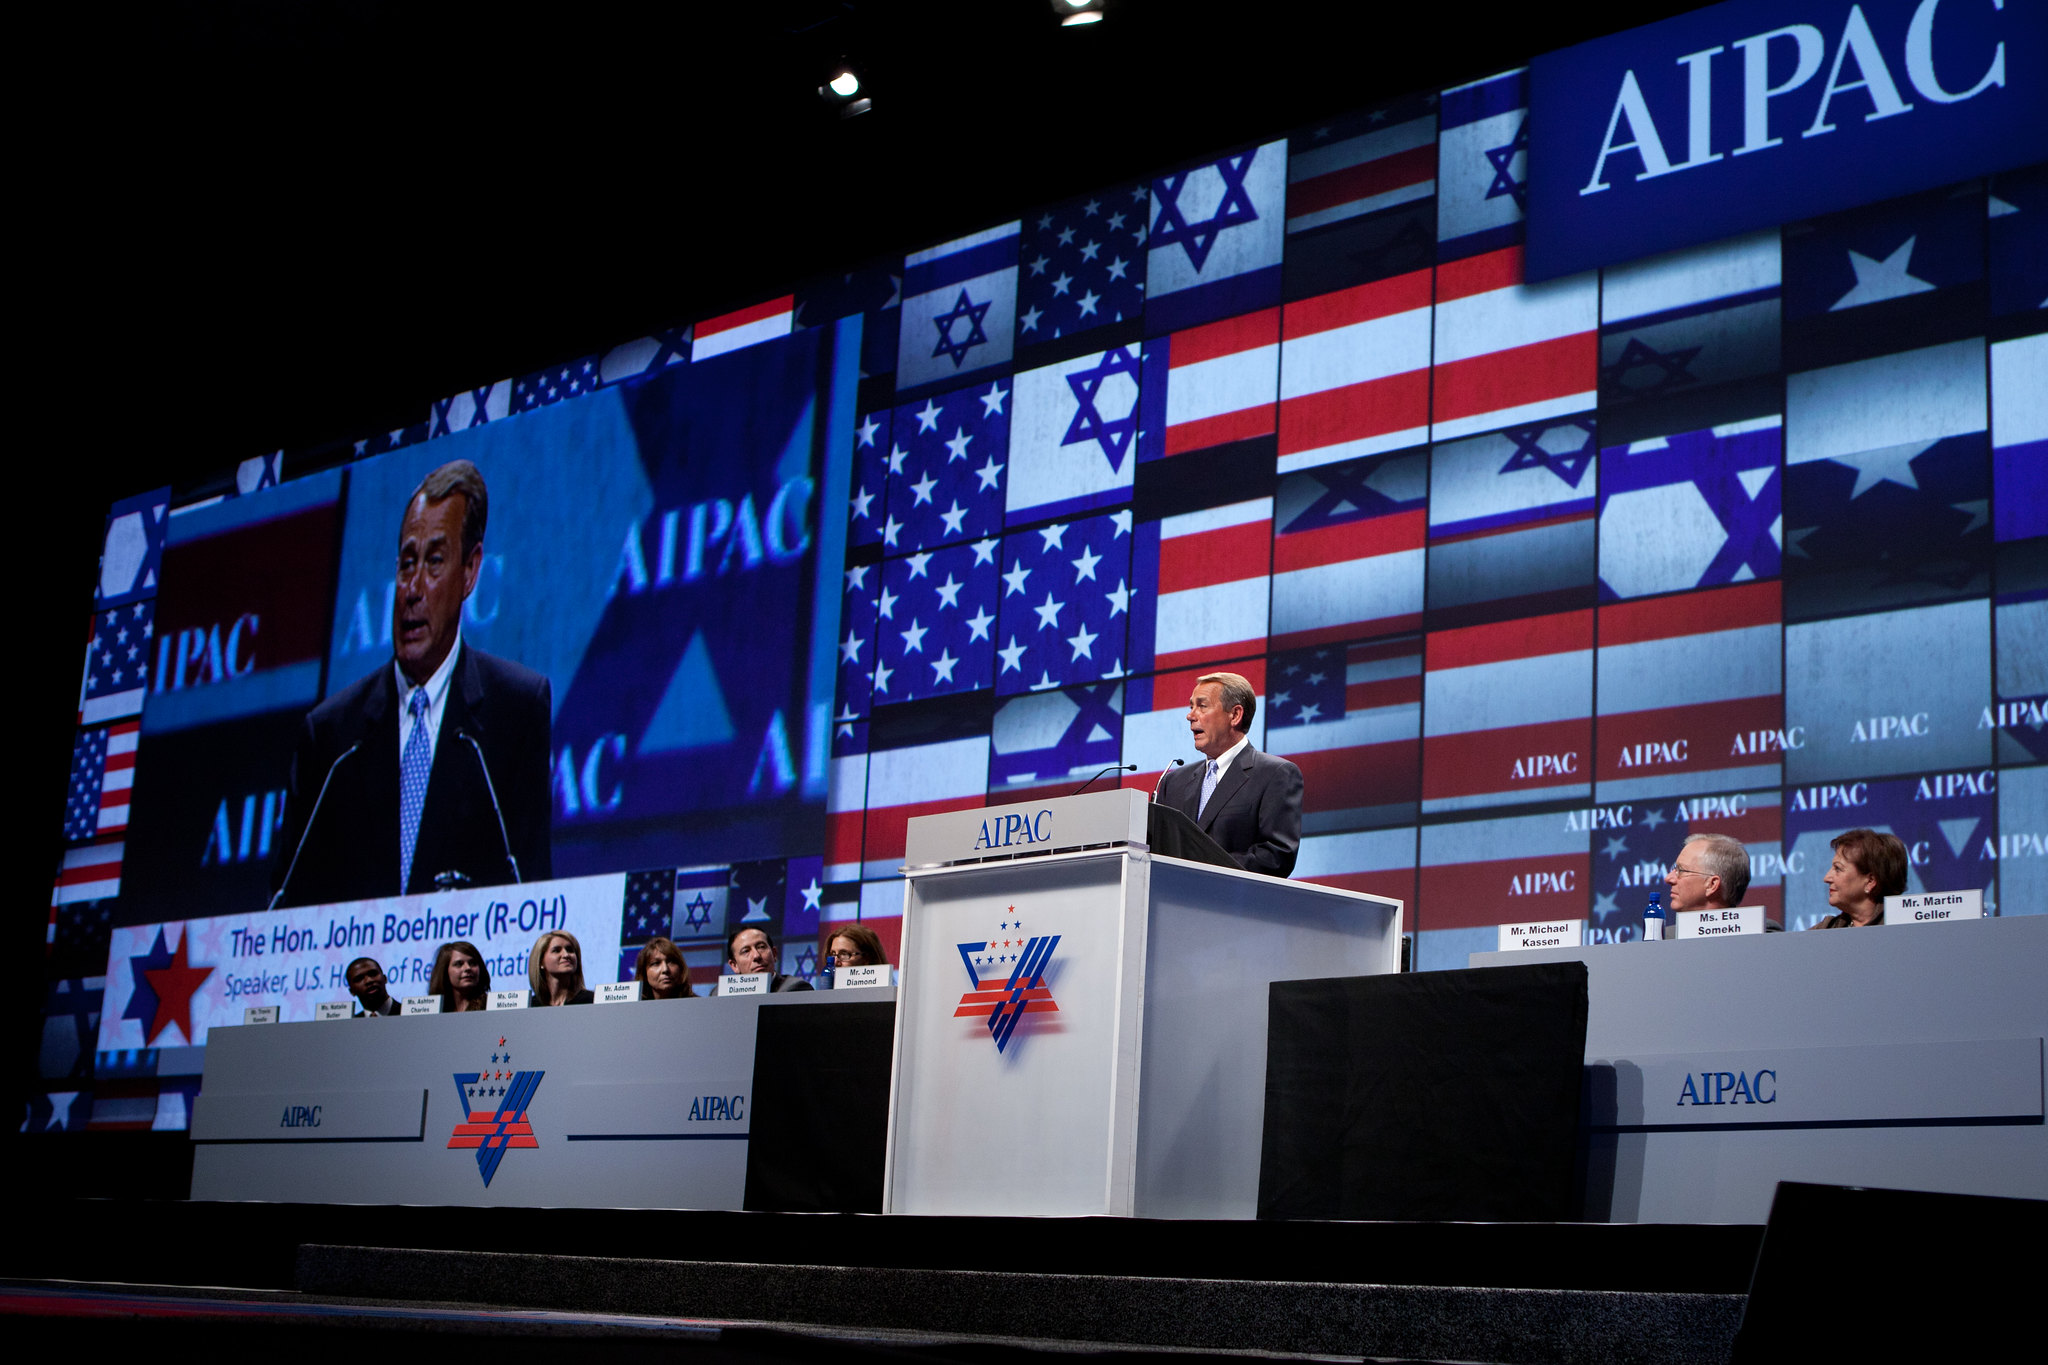 U.S. House Speaker John Boehner delivers remarks at the American Israel Public Affairs Committee (AIPAC) policy conference, May 23, 2011. (Speaker John Boehner/Flickr)